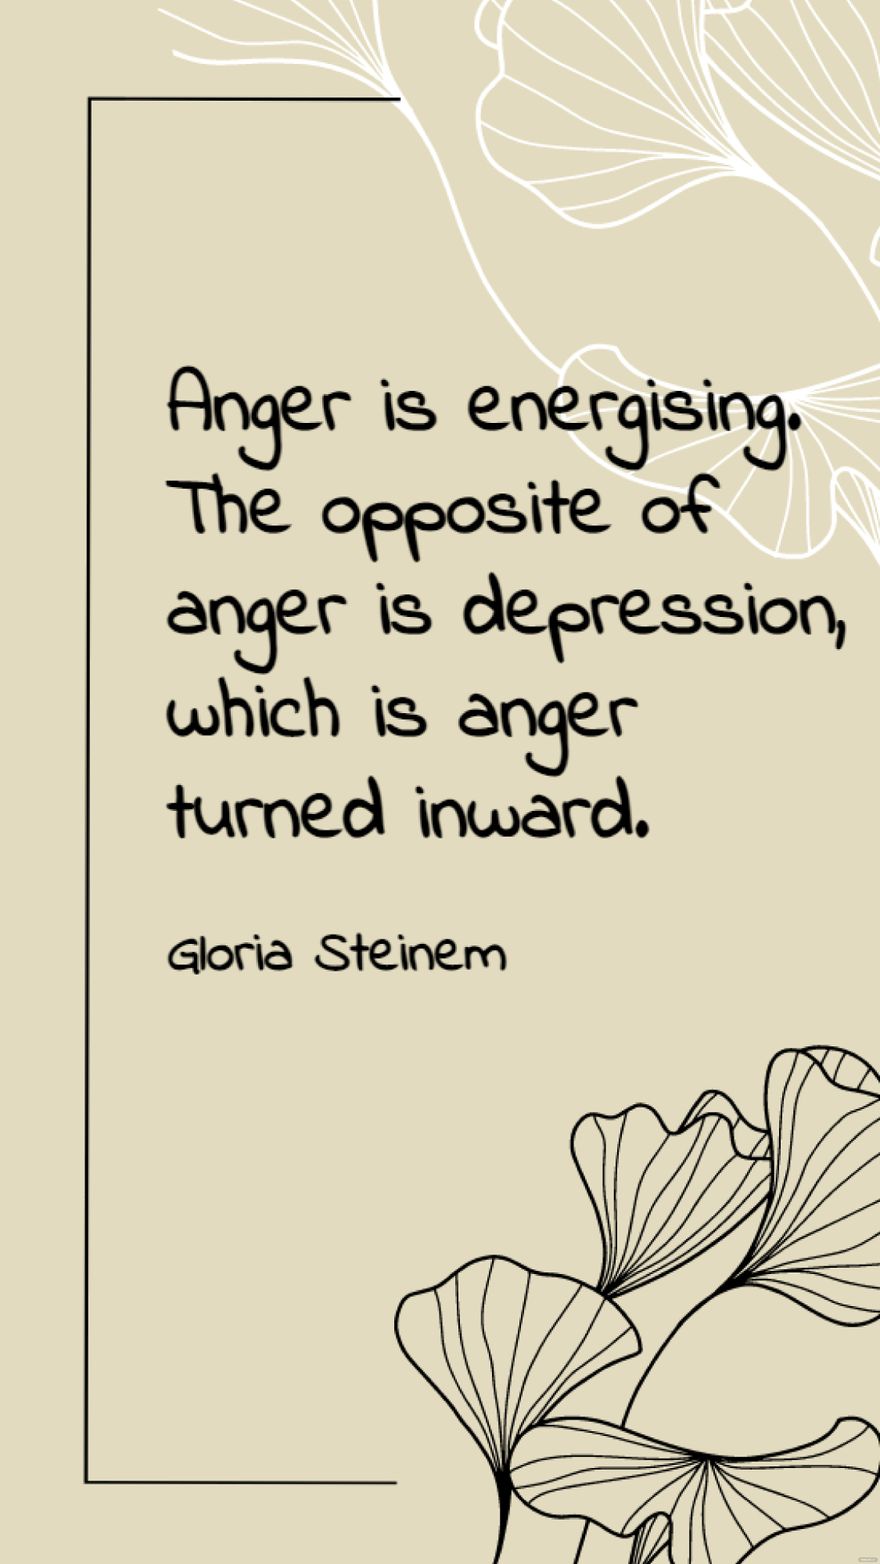 Gloria Steinem - Anger is energising. The opposite of anger is depression, which is anger turned inward.